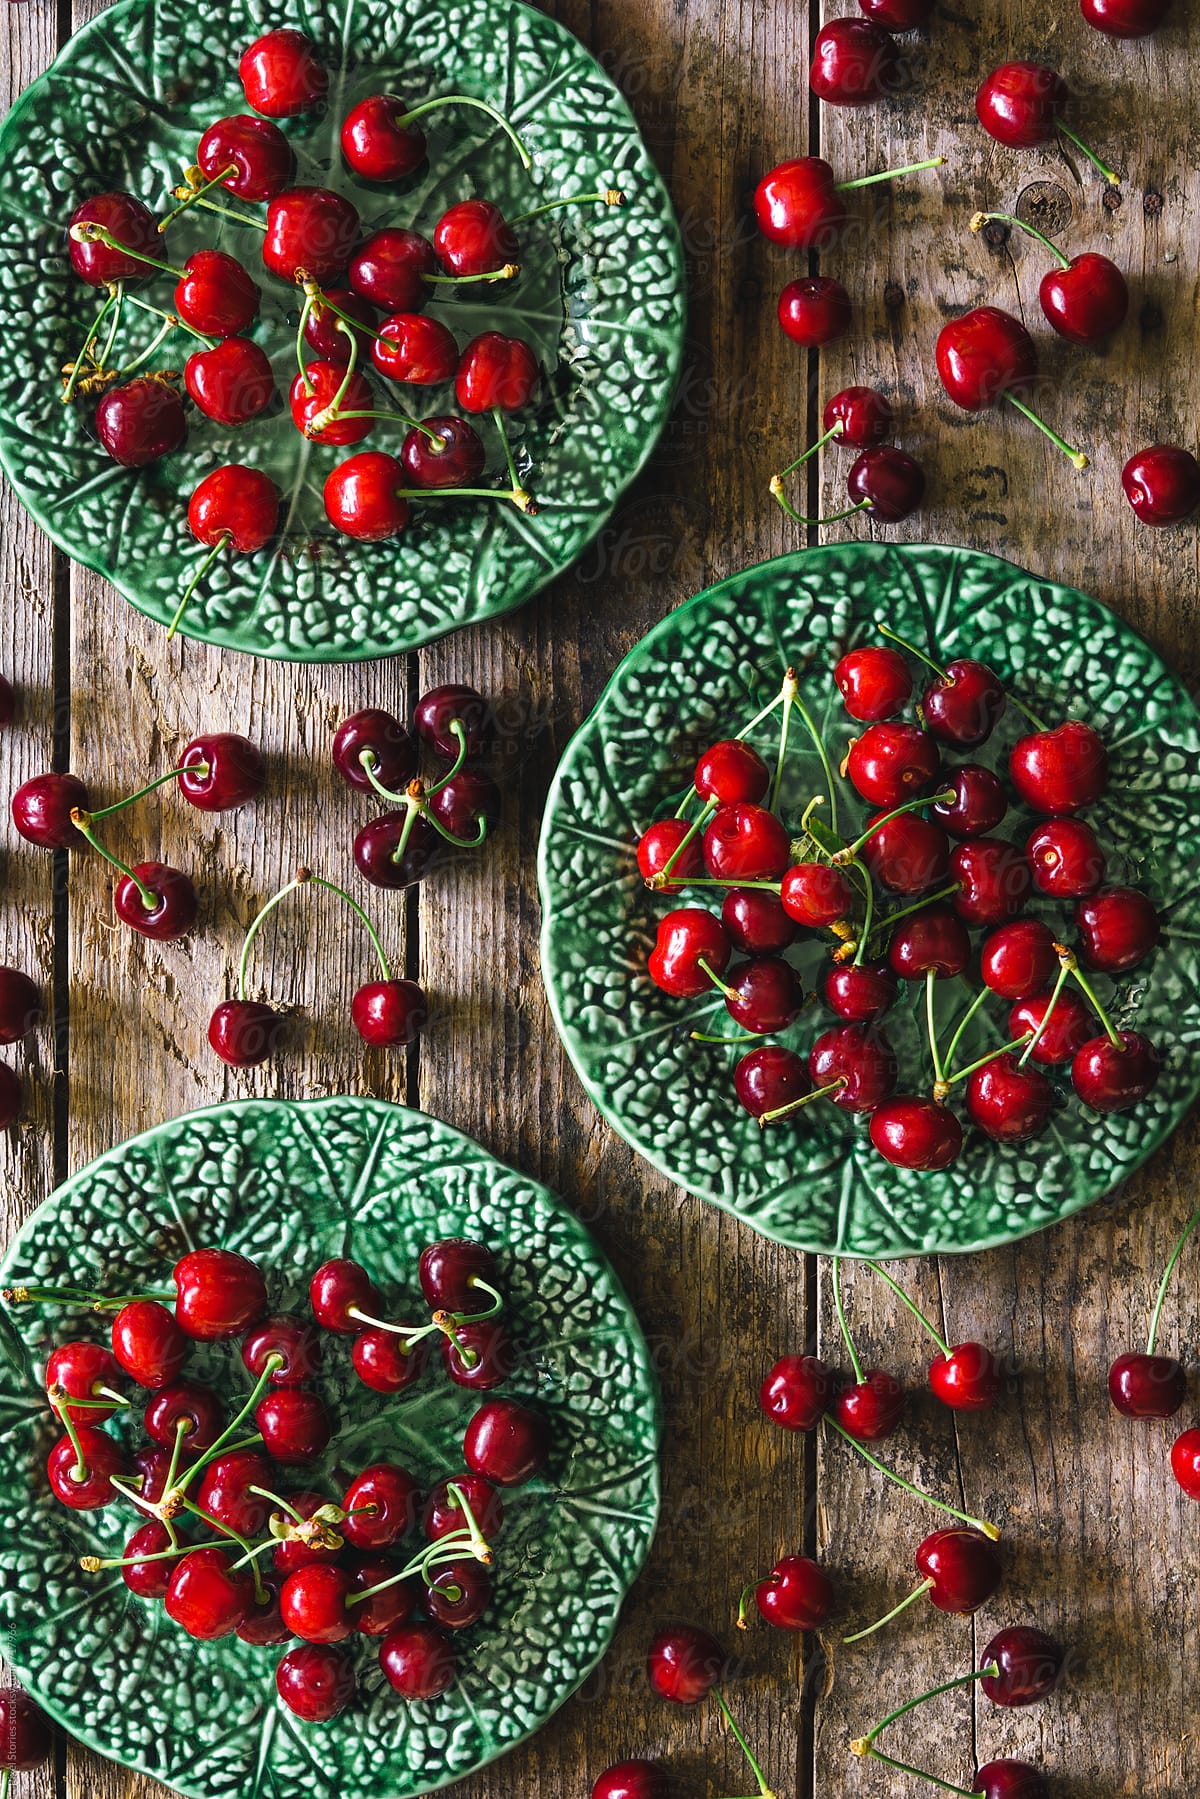 Cherries in dishes